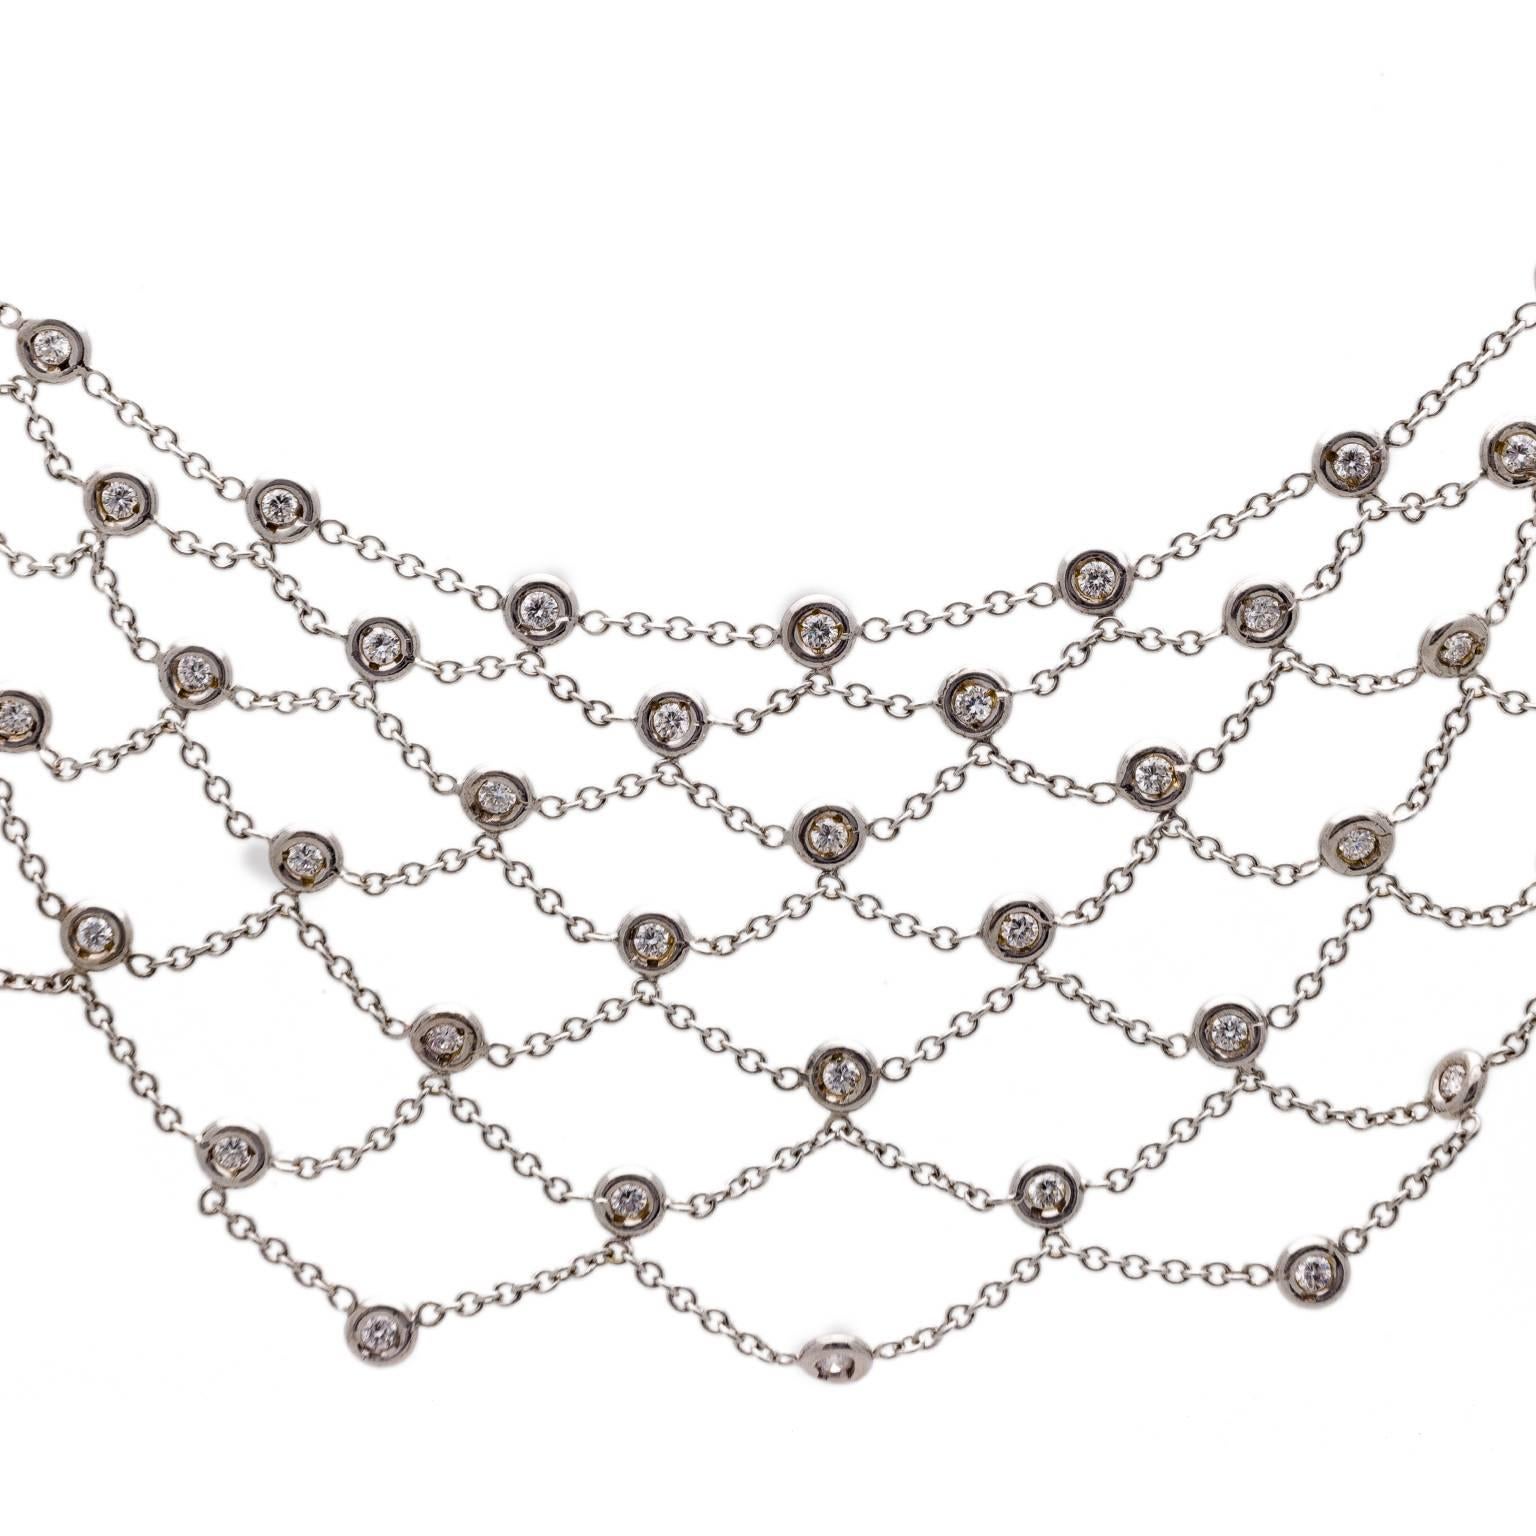 This diamond web necklace is sprinkled with a multitude of diamonds too numerous to count totaling almost 10 cts. Each stone is approximately 0.050 cts to interlock each web strand in 18k white gold. This necklace beautifully drapes on your neck for